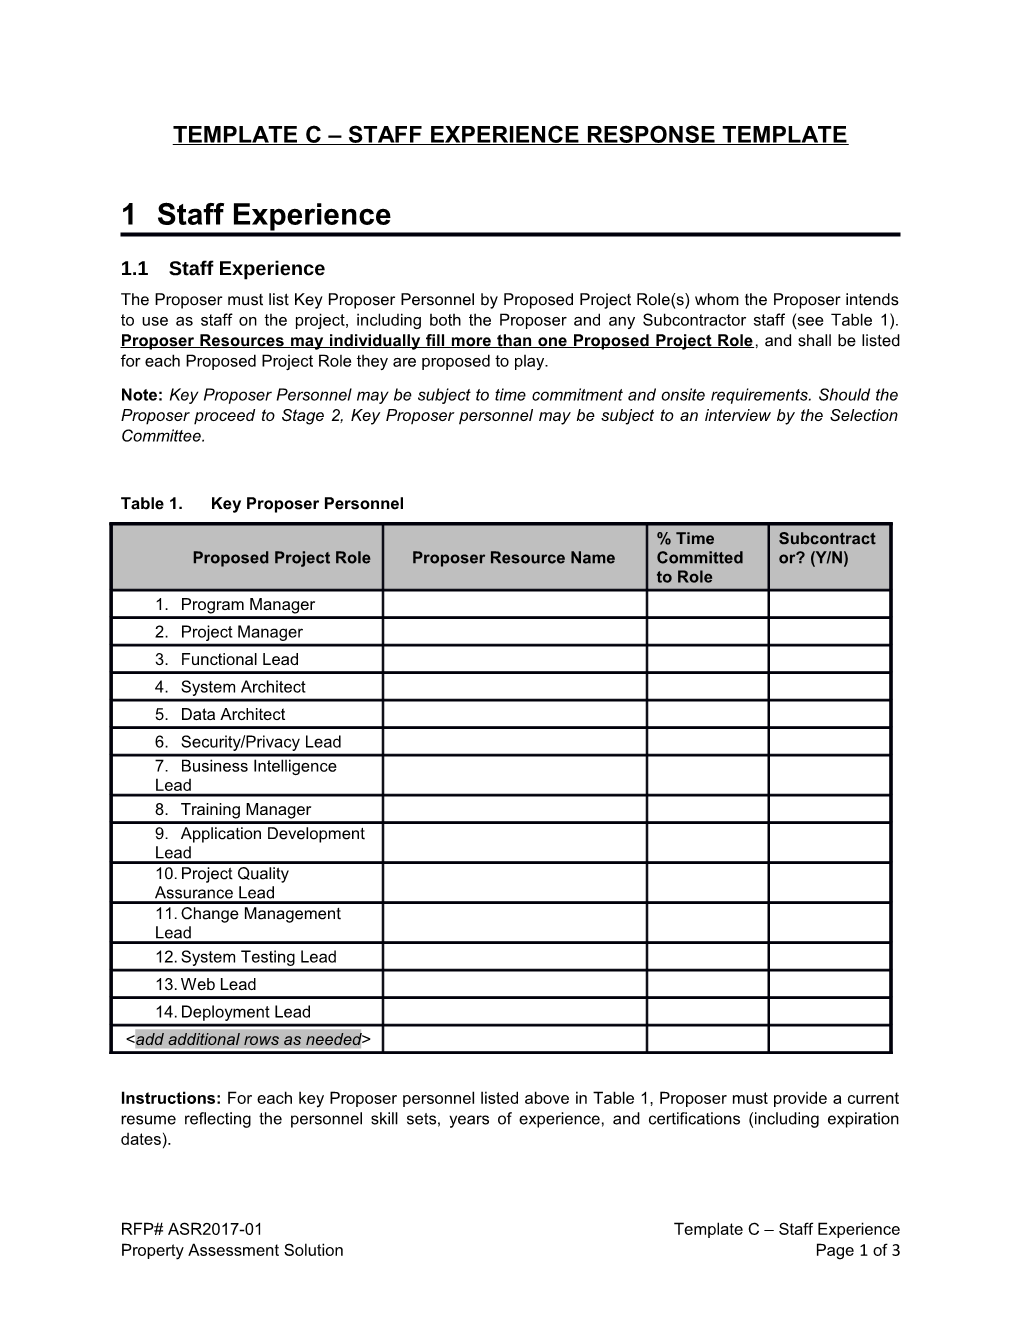 Templatec Staff Experience Response Template